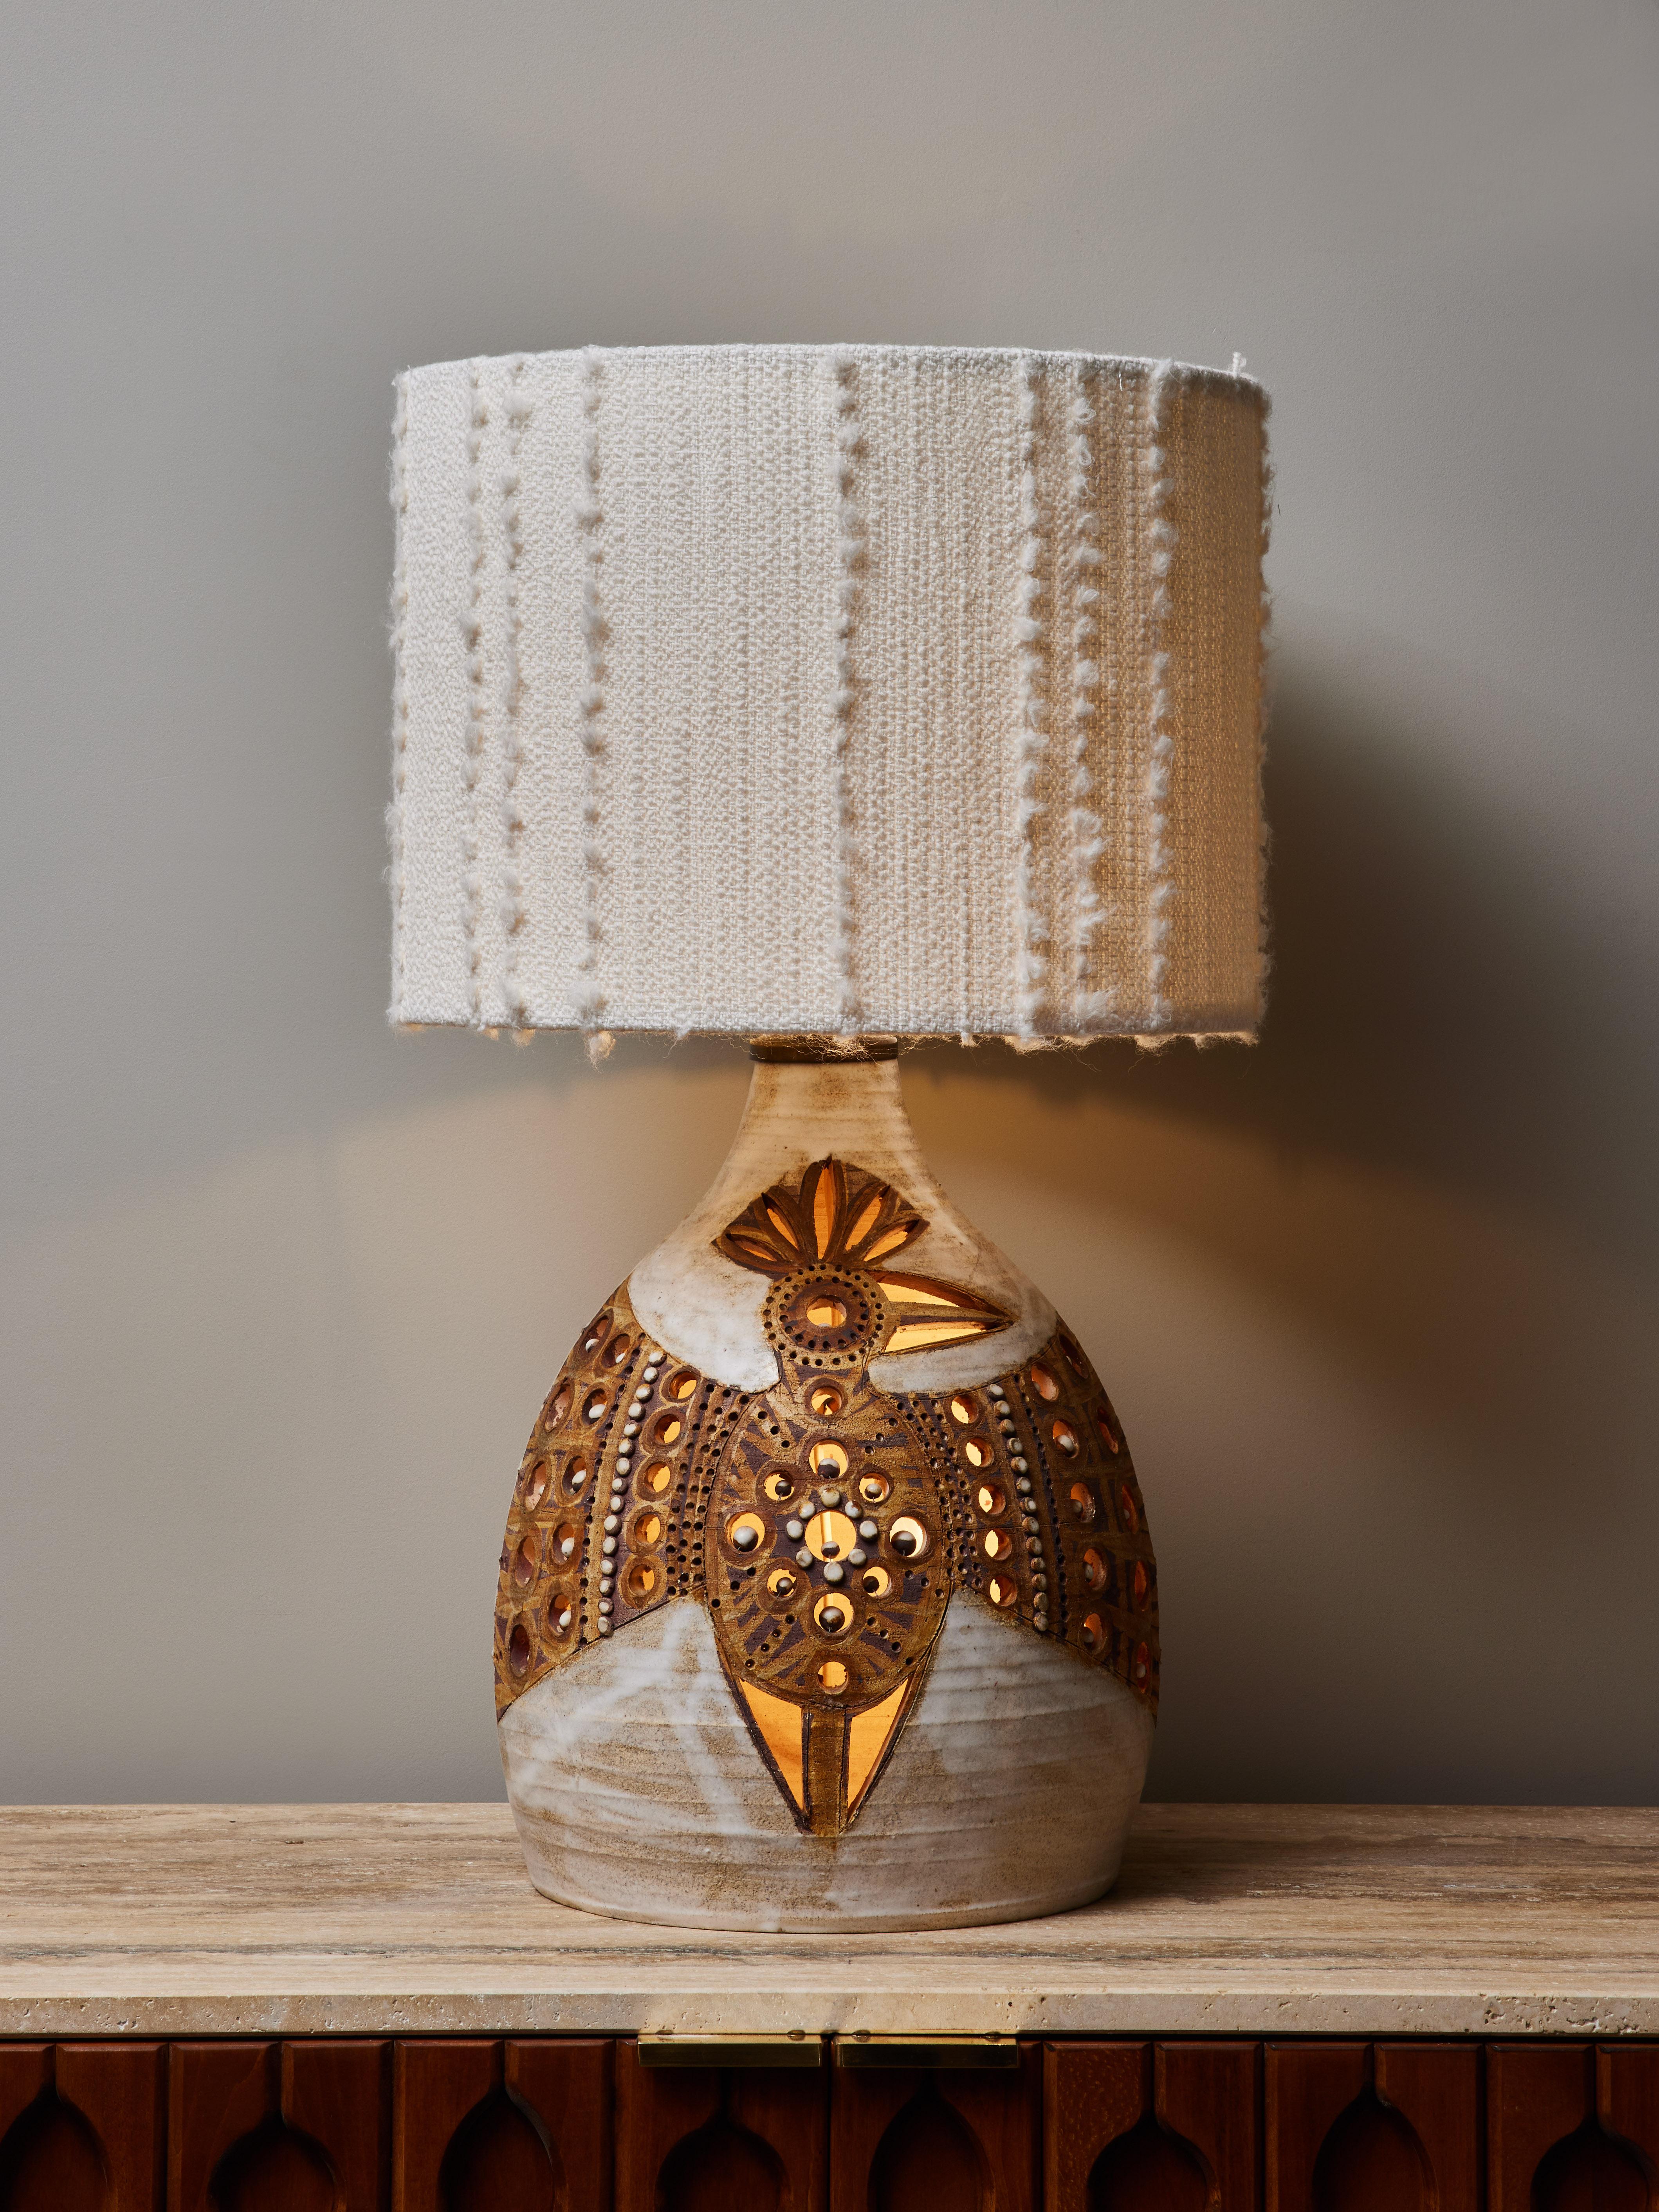 Rare example of the work of Georges Pelletier, this ceramic table lamp is quite exceptional considering the glazed décor that take the whole surface of the lamp. A stylized eagle, made with various tones of browns and beiges. The artist definitely